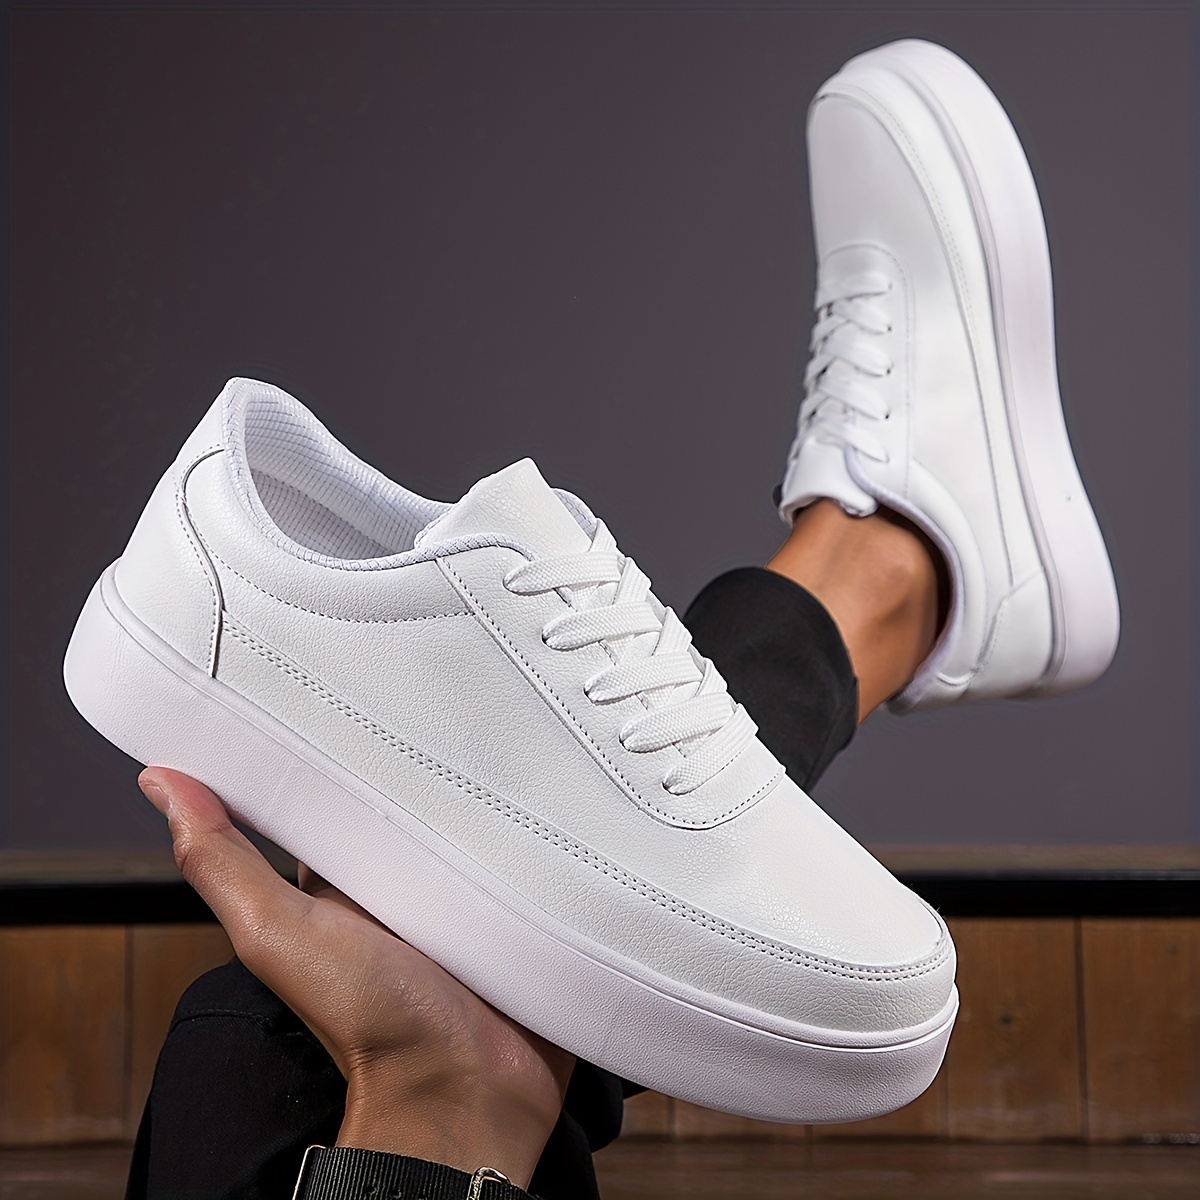 Mens Trendy Skate Shoes Casual Breathable Comfy Anti Skid Lace Up